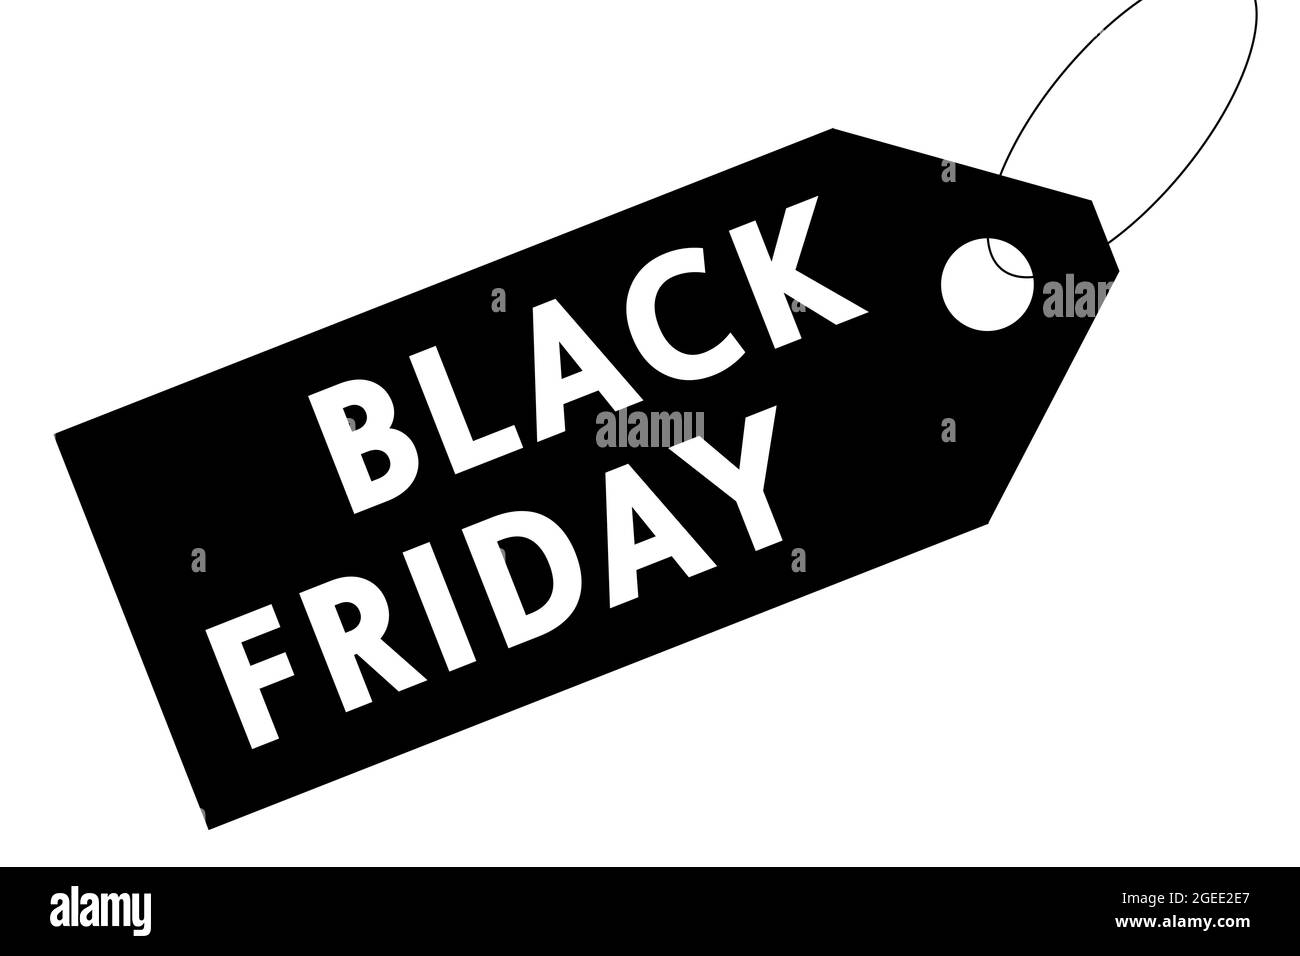 black friday sale and discount banner Stock Photo